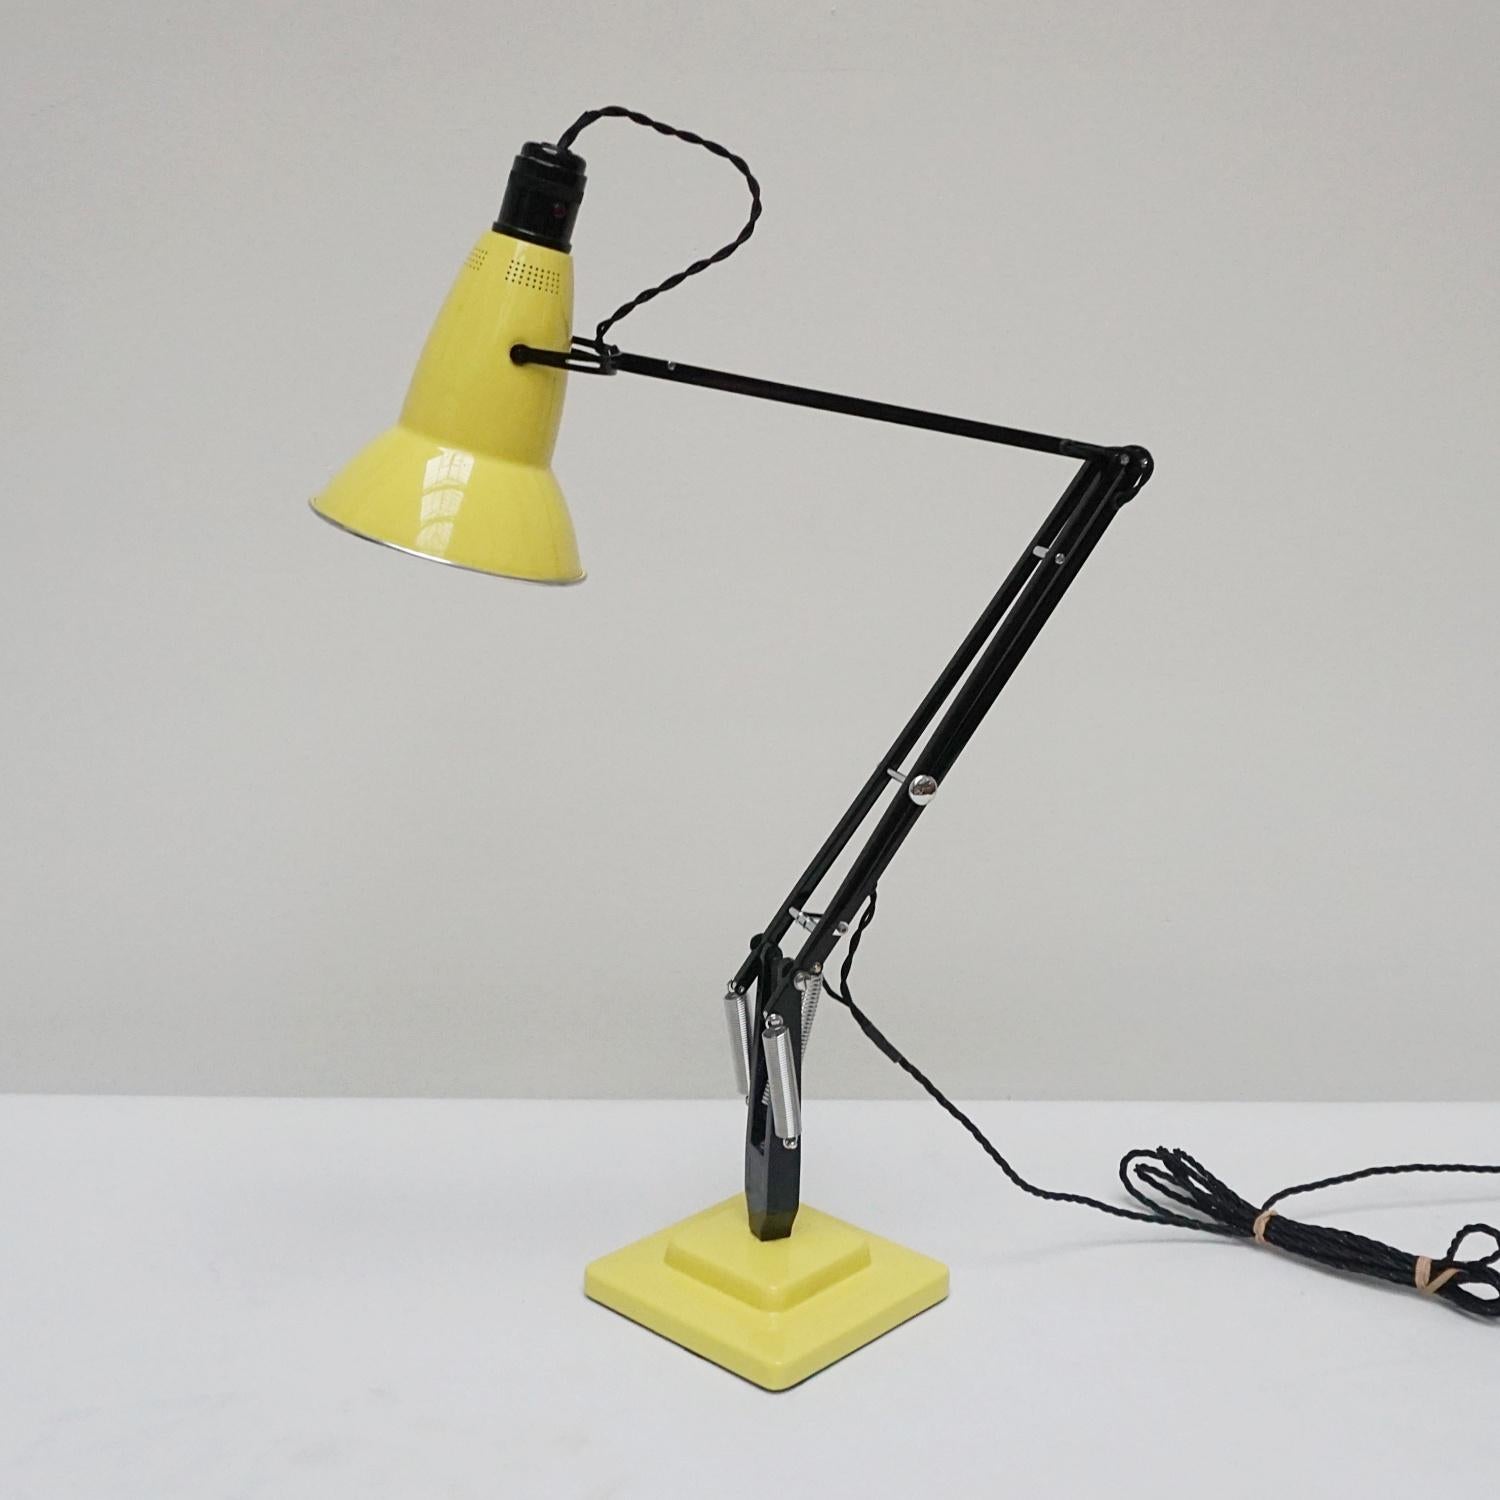 'Three-spring' 1930's prototype Anglepoise desk lamp by Herbert Terry & Sons. Black arm assembly with matching yellow two step base and perforated lamp shade. Original stamps to stem. The three spring Anglepoise lamp was first released by Herbert